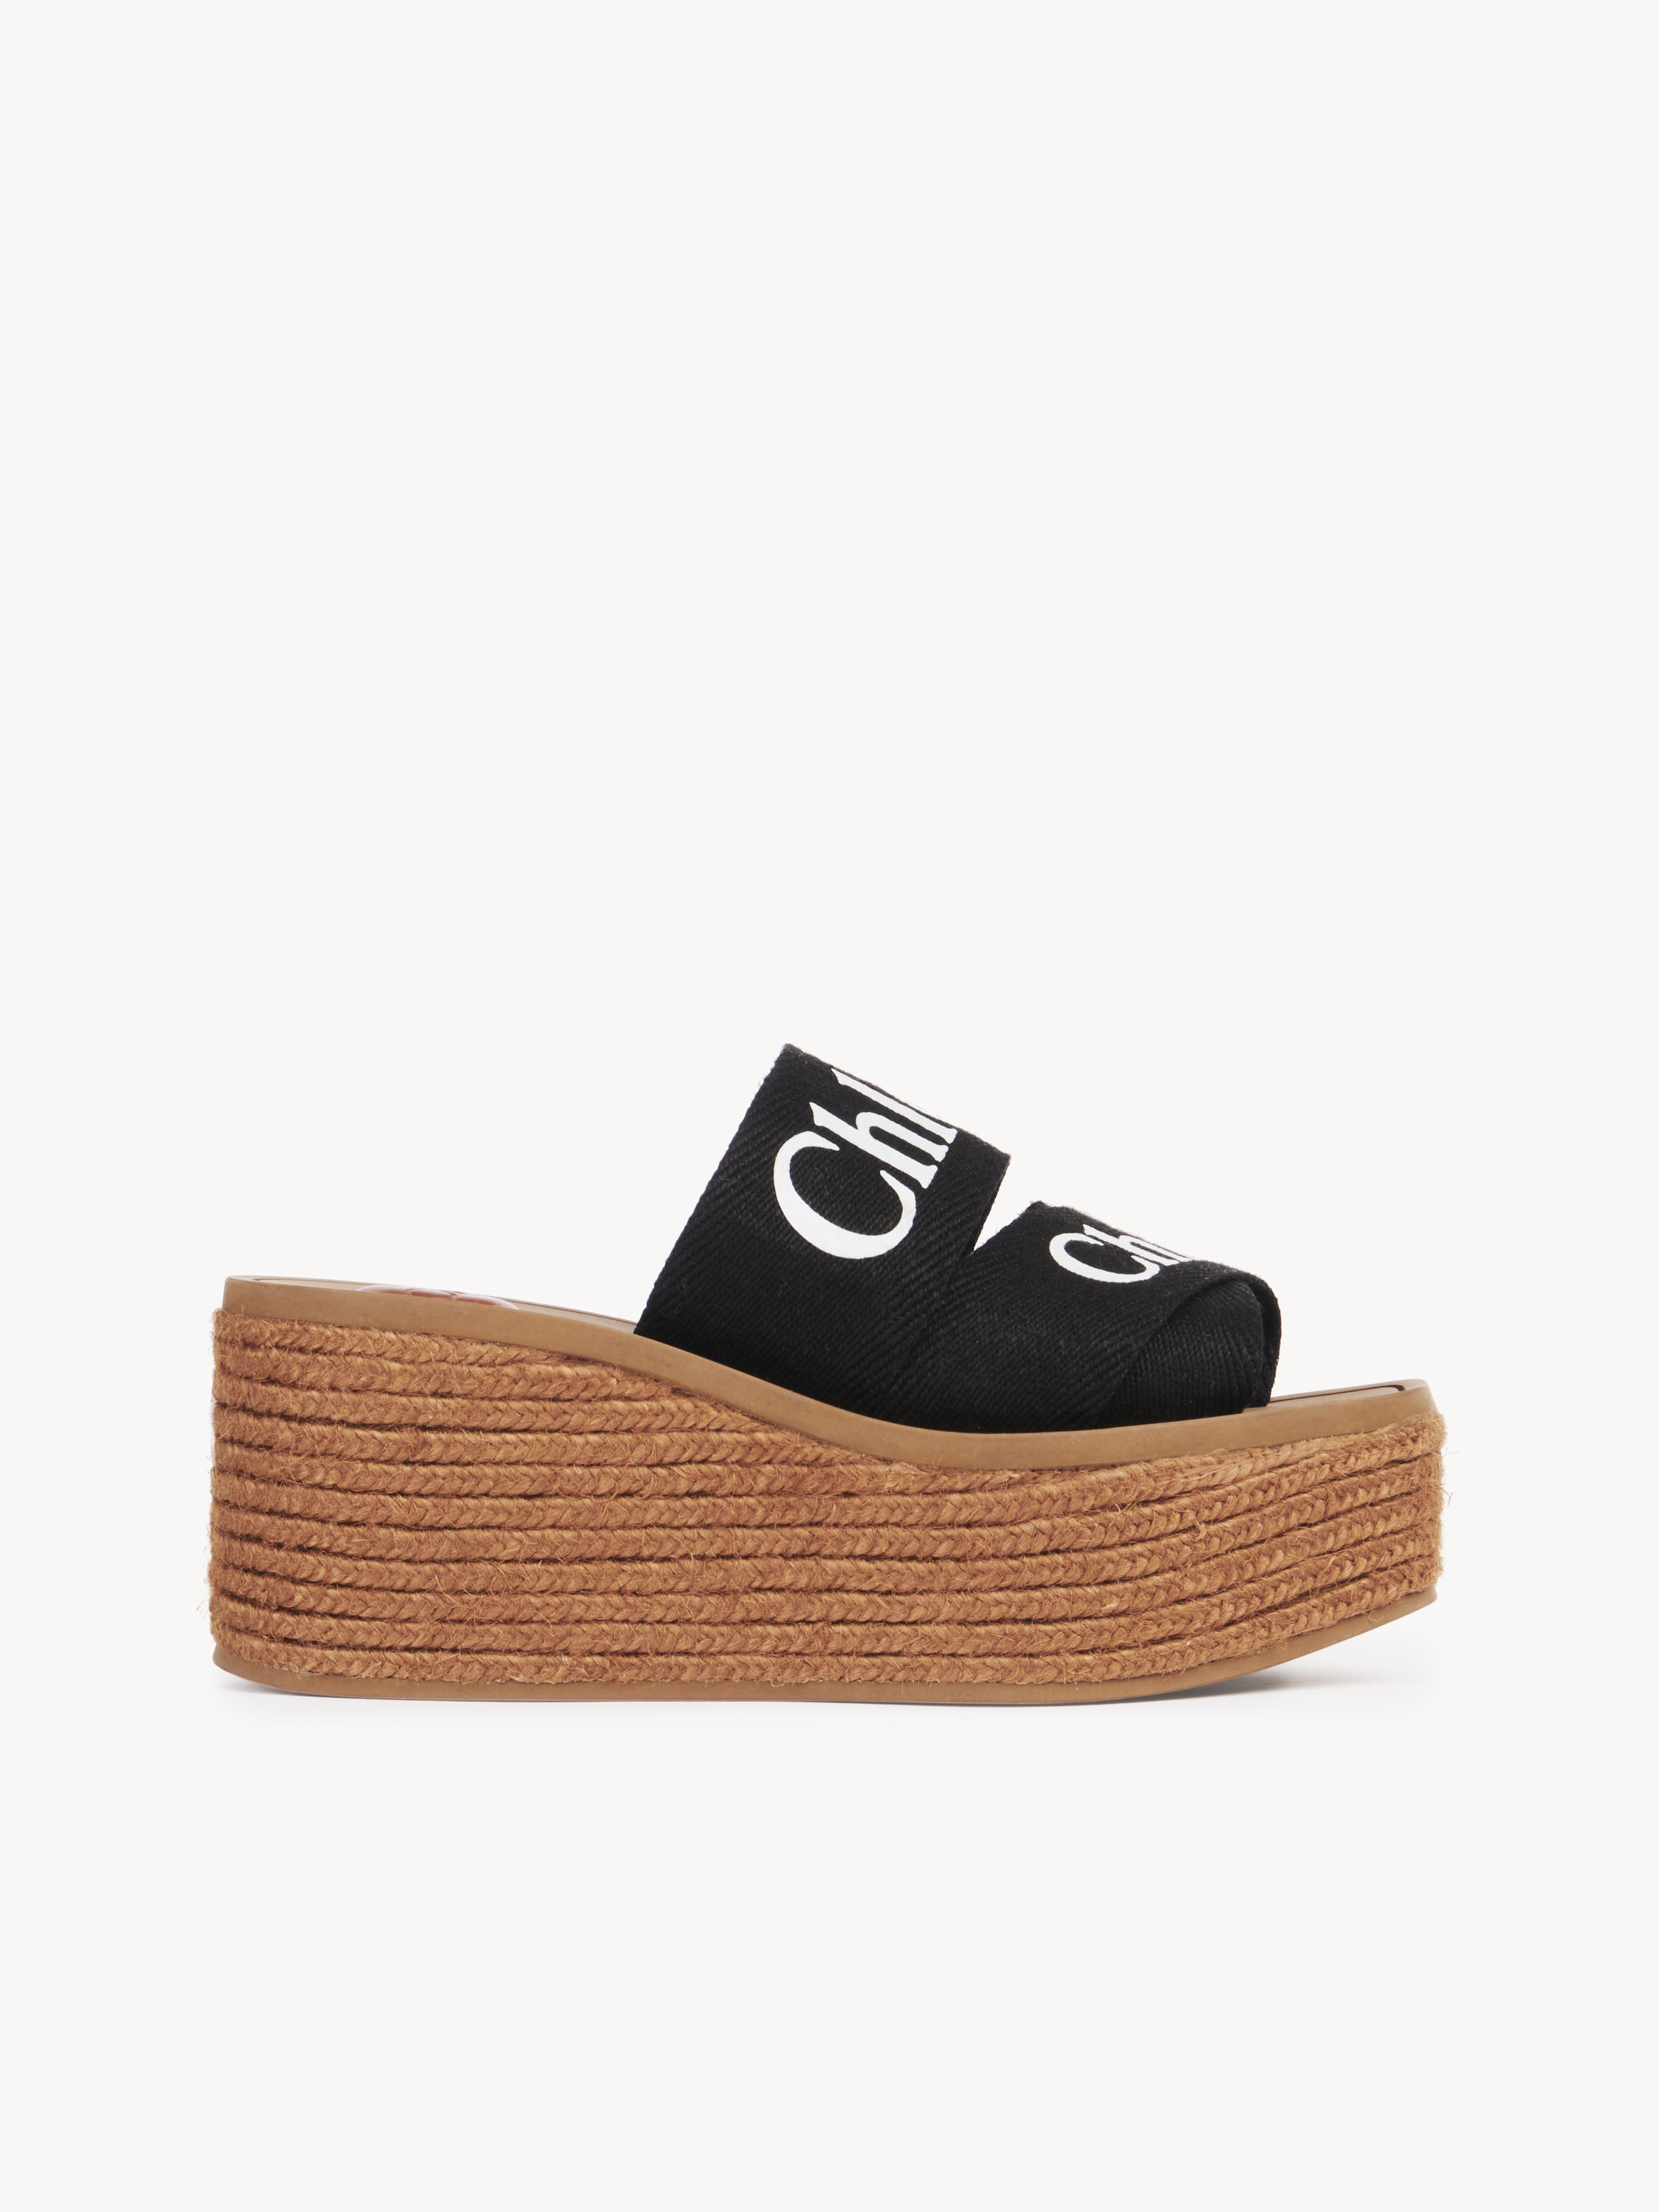 Chloé Mules Espadrilles Woody Femme Noir Taille 38 90% Lin, 10% Polyester, Quercus Suber, Farmed, Coo Spai